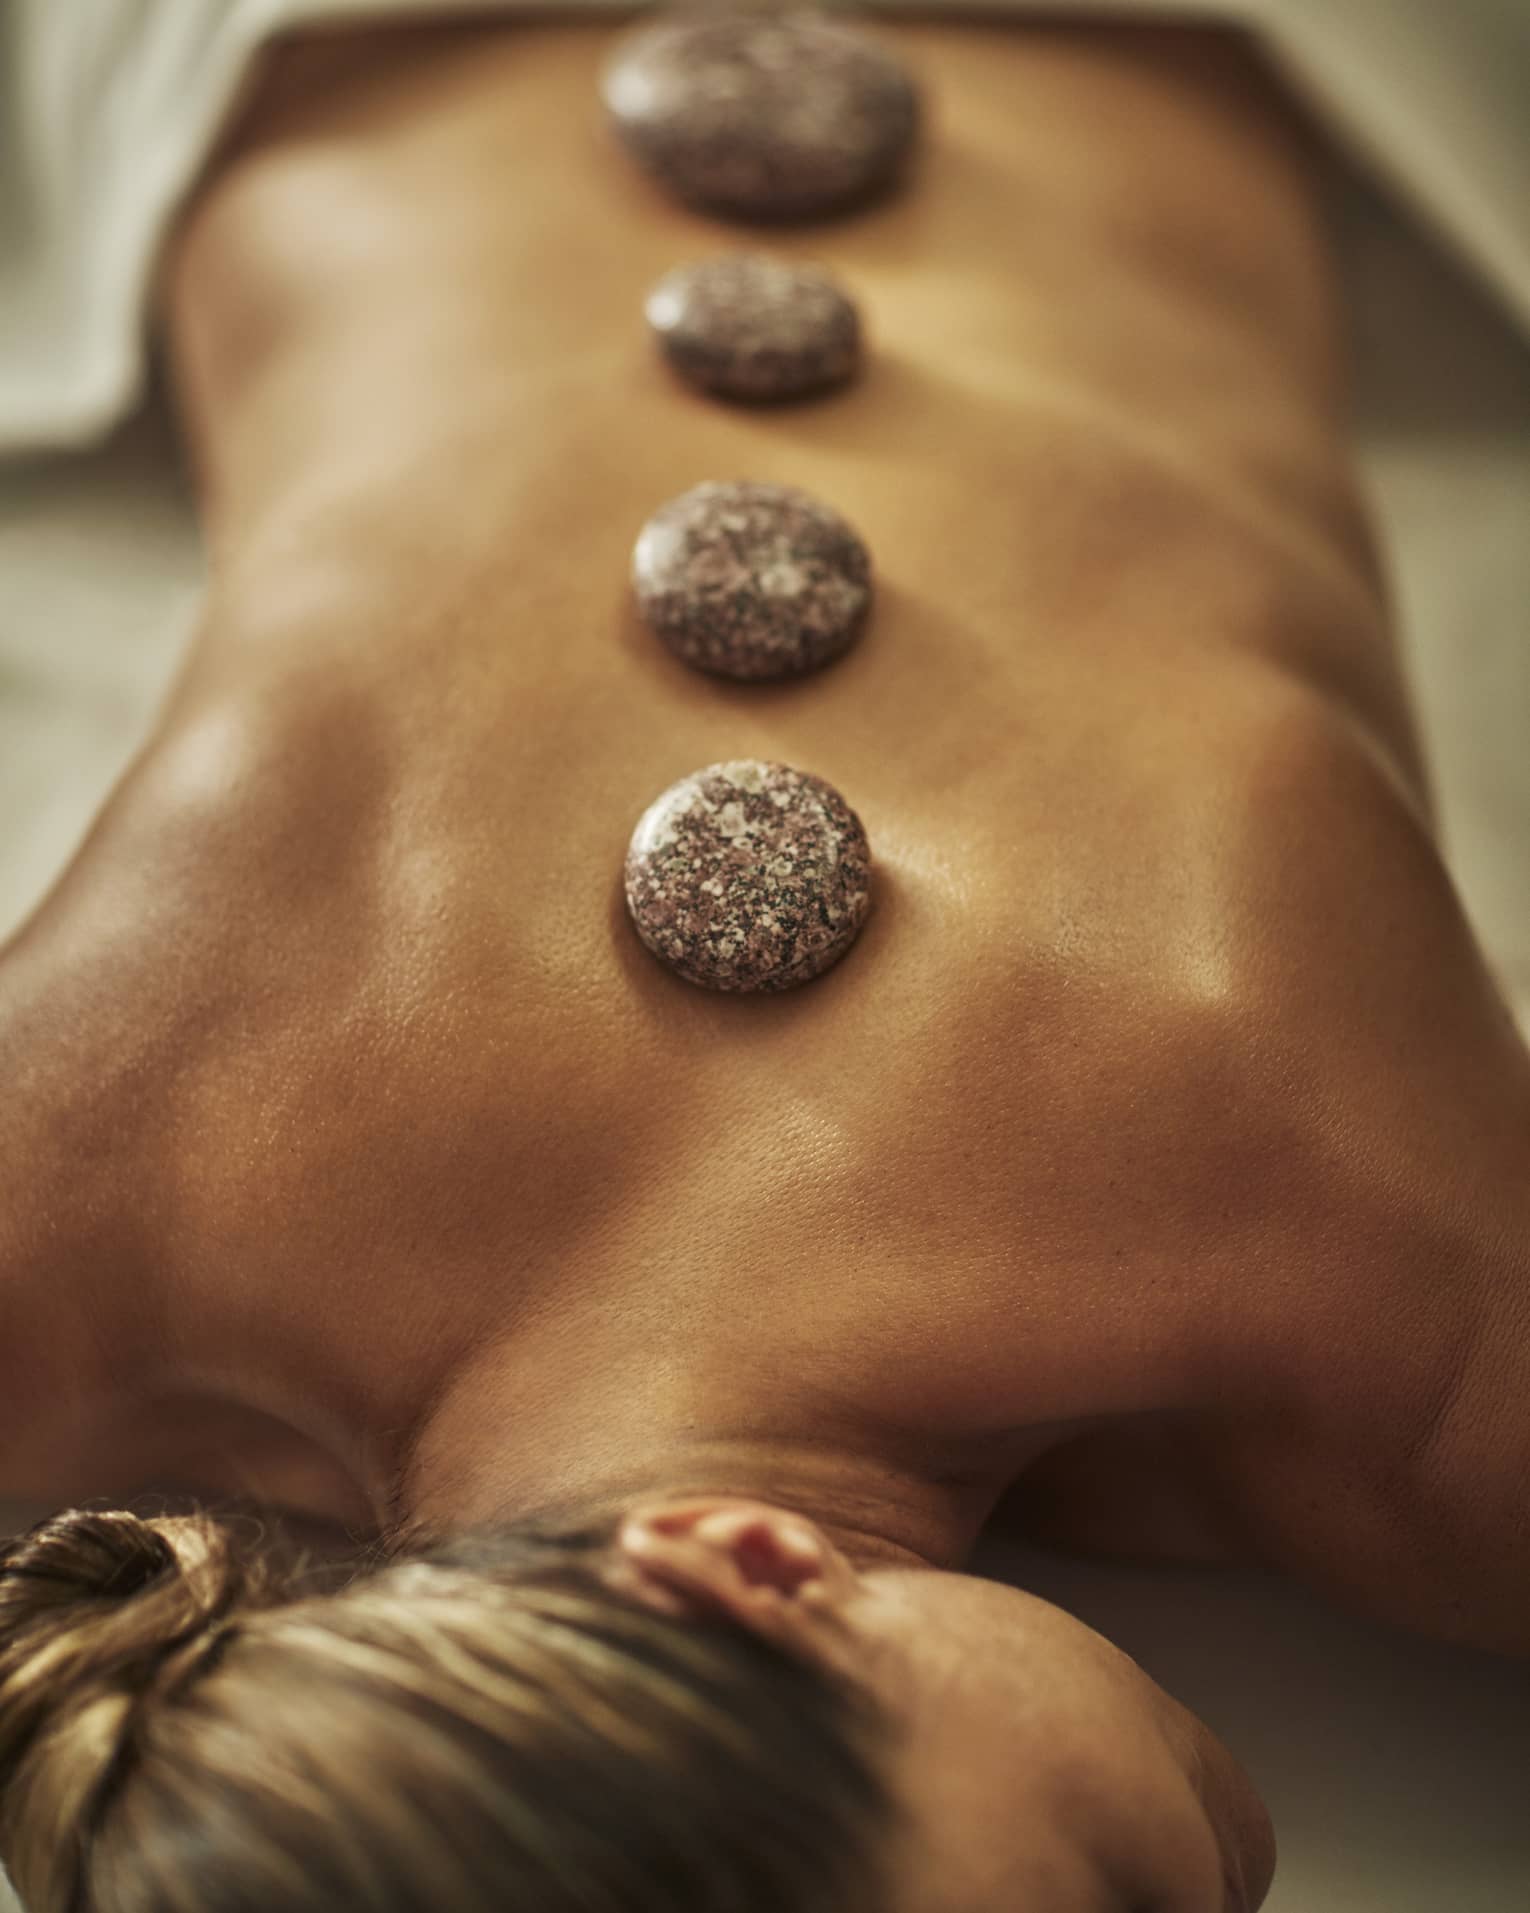 A woman lies on a spa table with four hot stones laid on her back